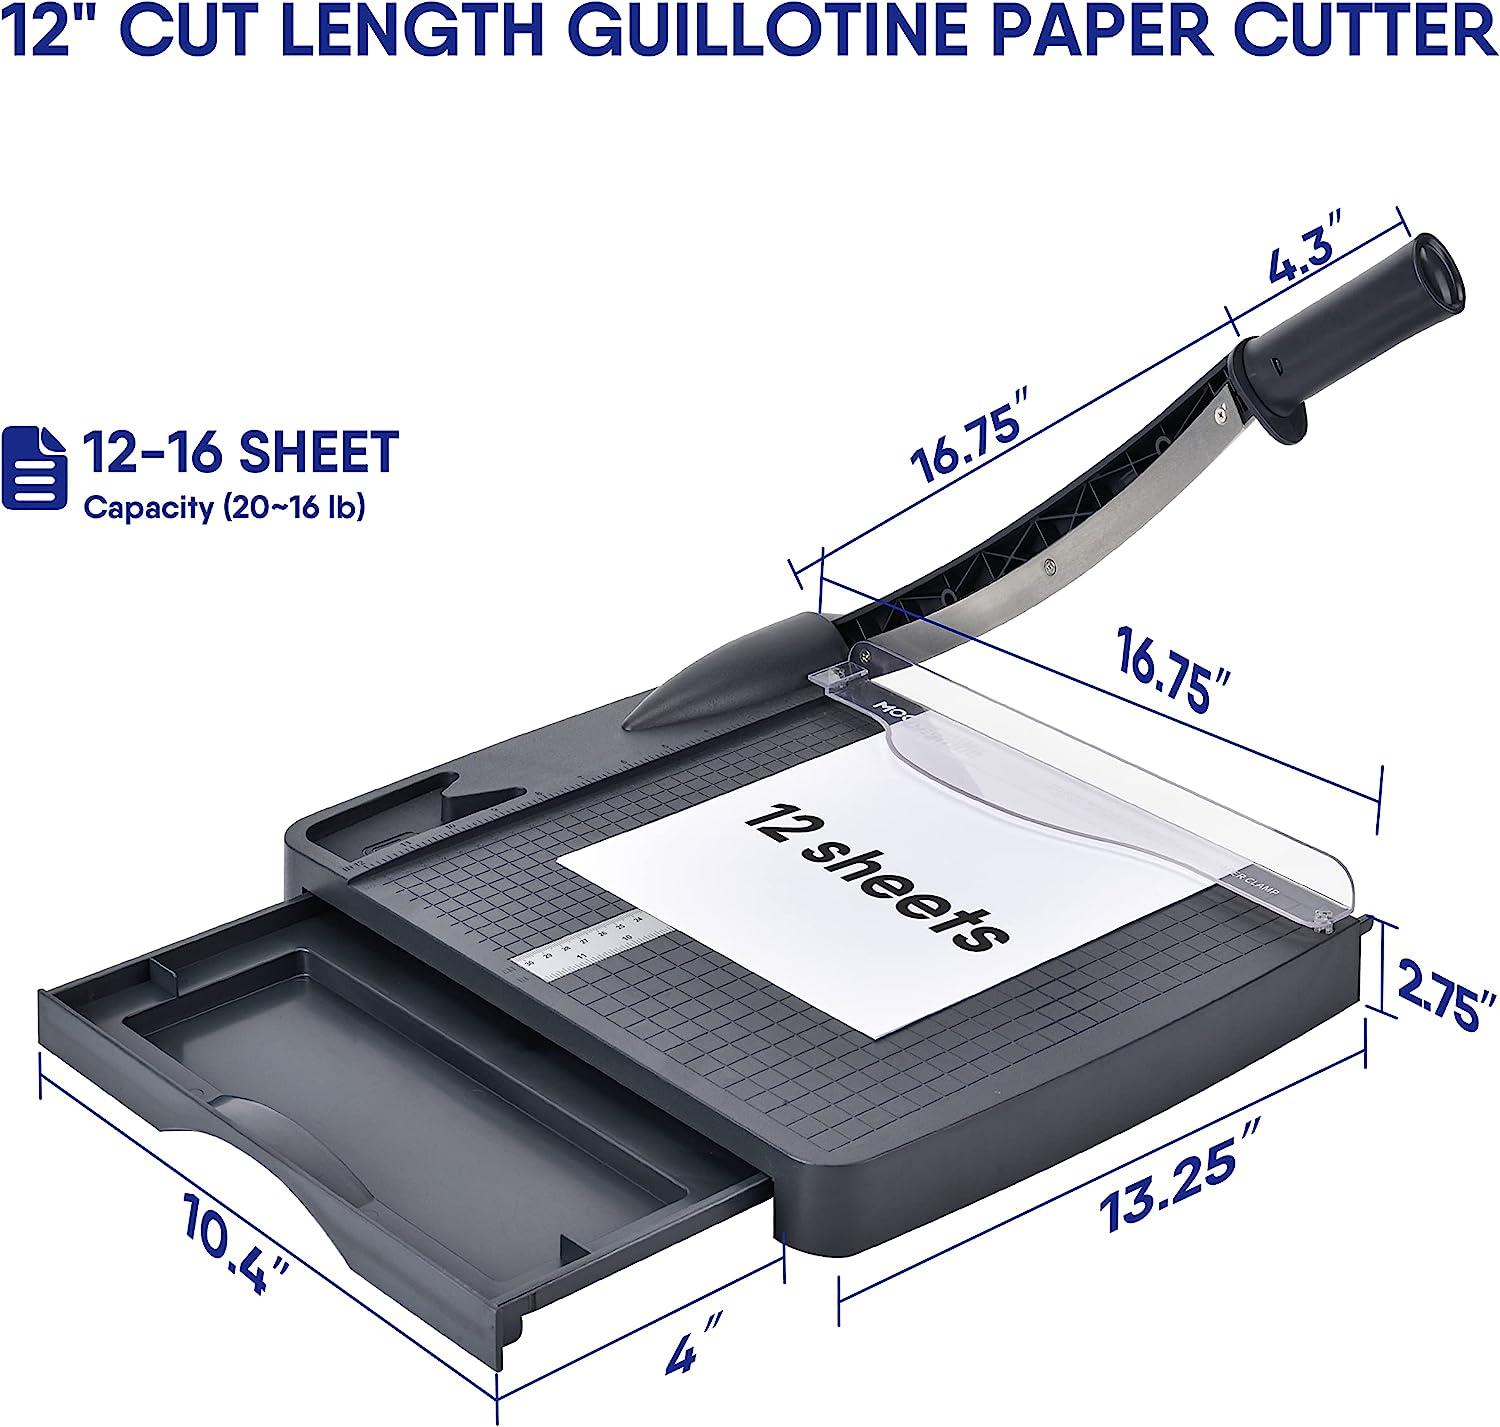 Moonsmile Paper Cutter, 12 Inch Cut Length Heavy Duty Guillotine